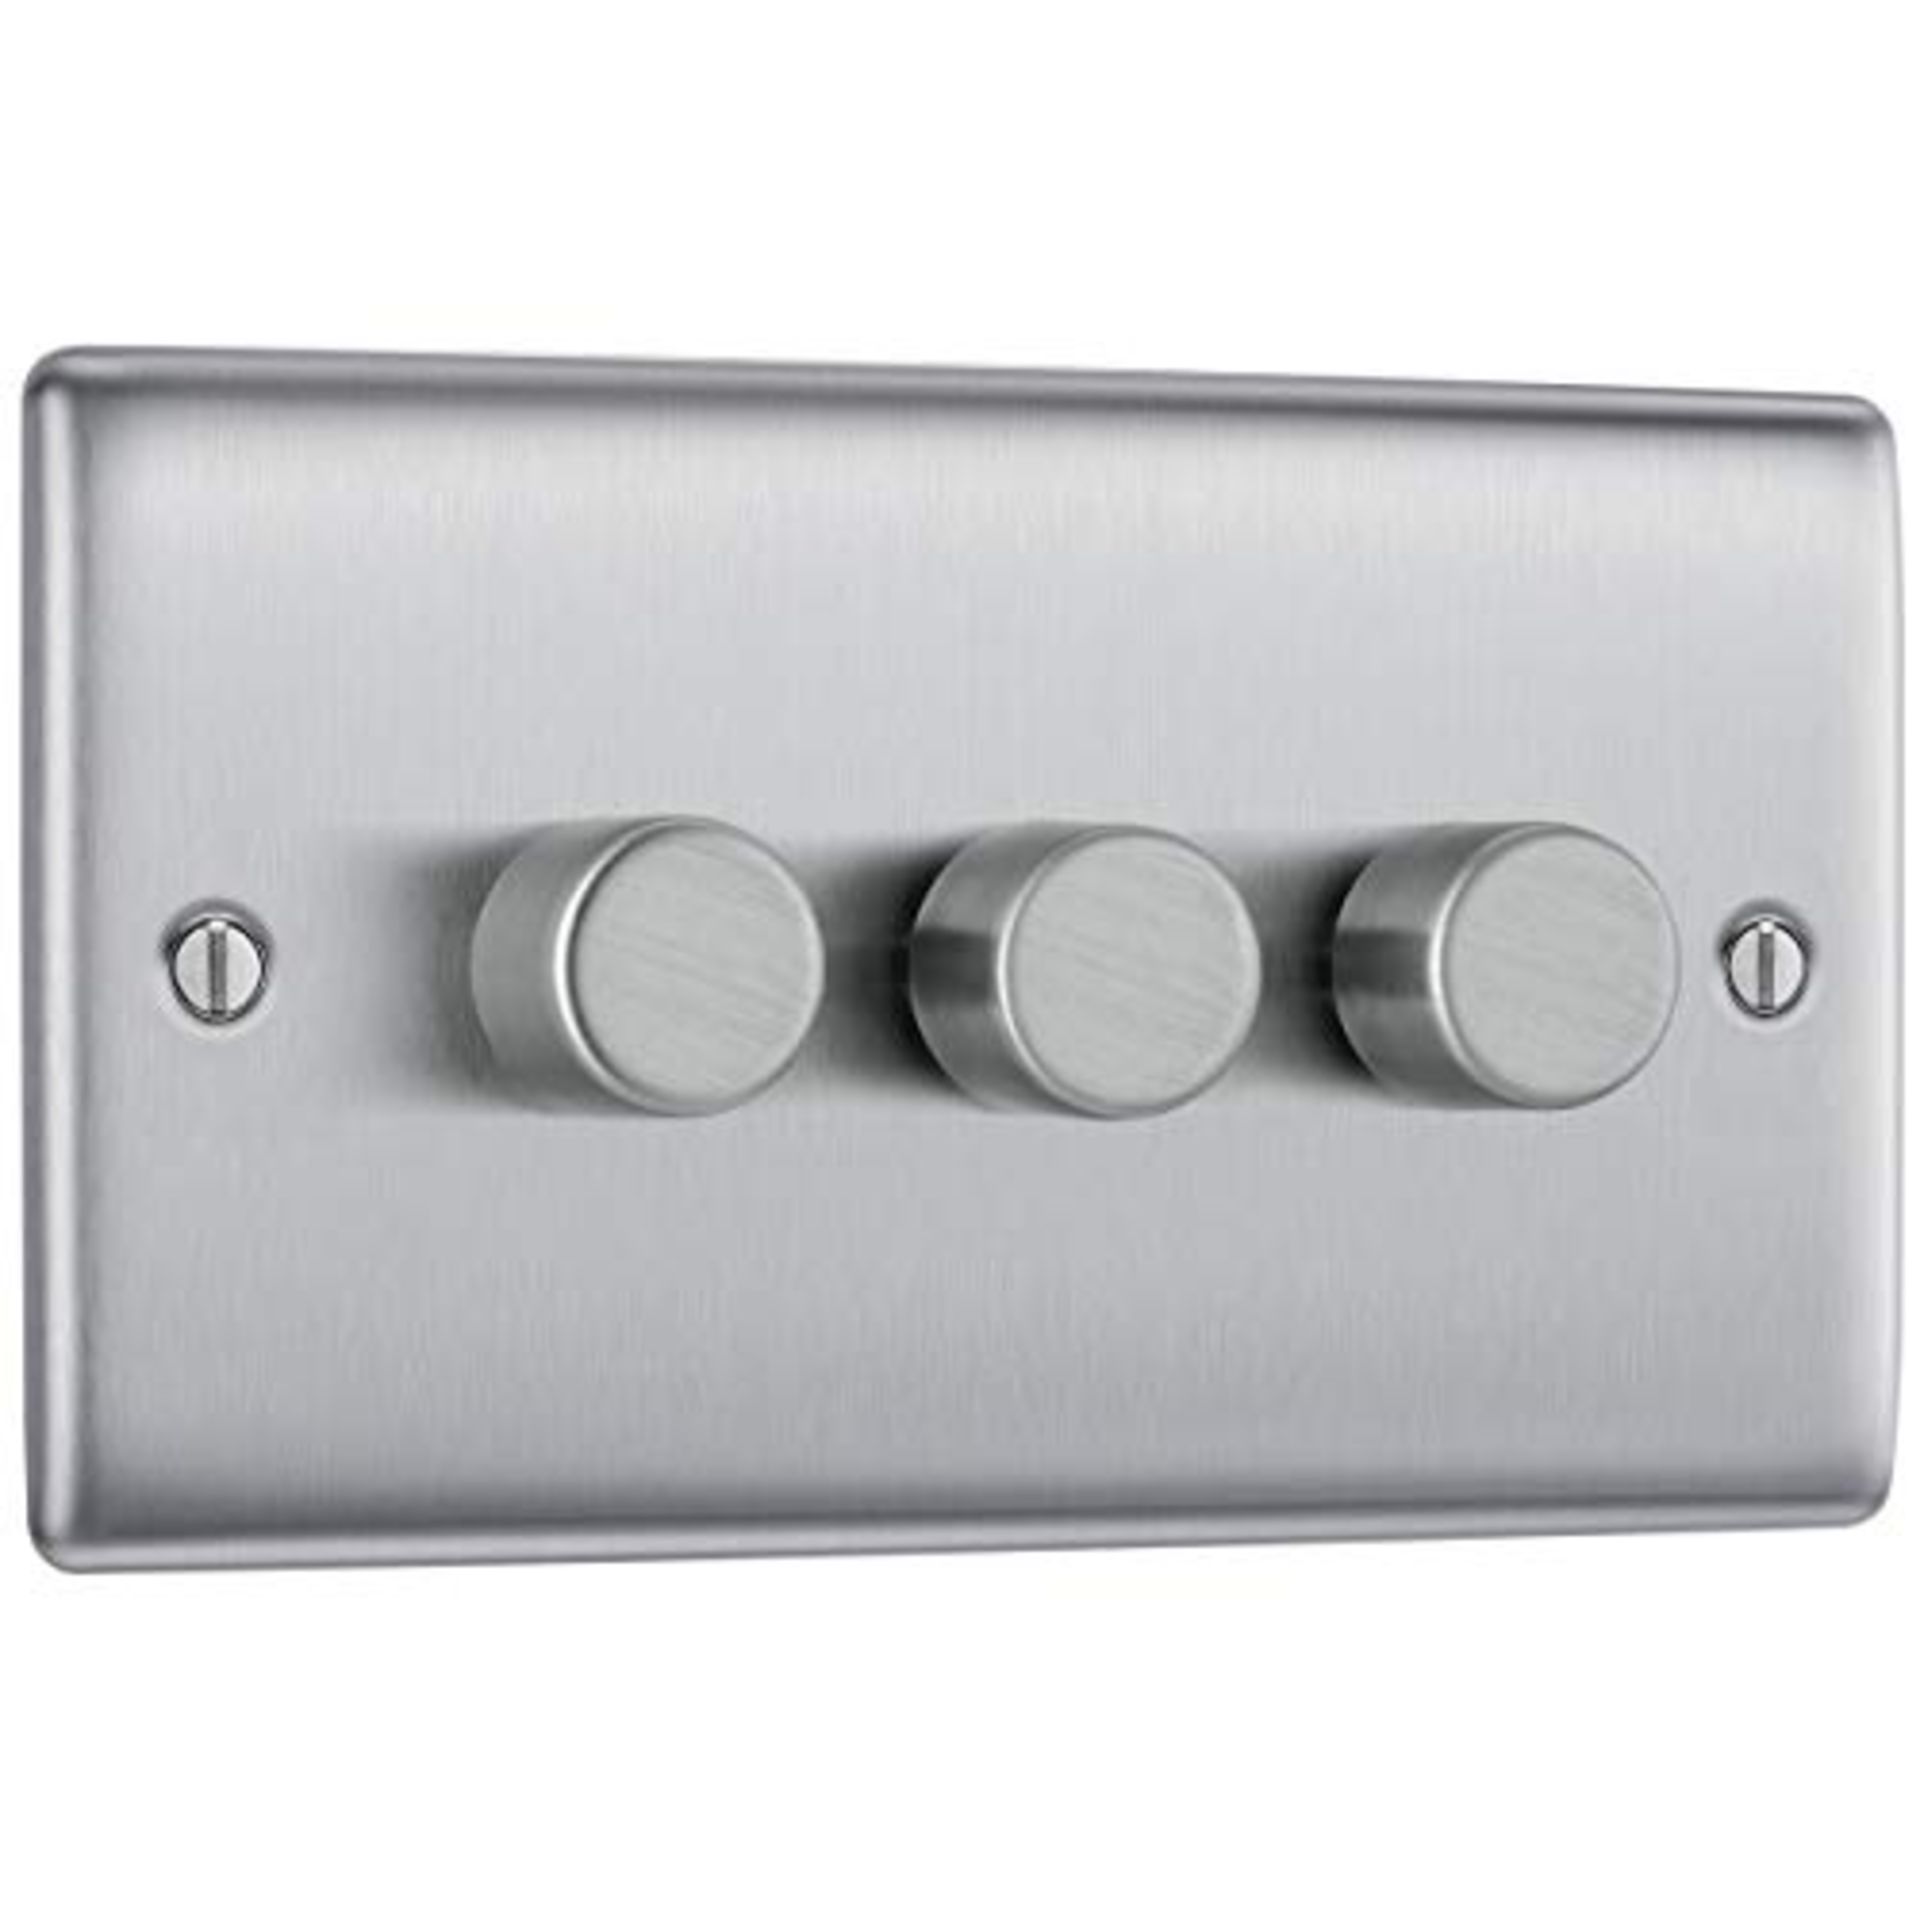 BG Electrical NBS83-01 BRUSHED STEEL 200W TRIPLE DIMMER SWITCH, 2-WAY PUSH ON/OFF, TRA